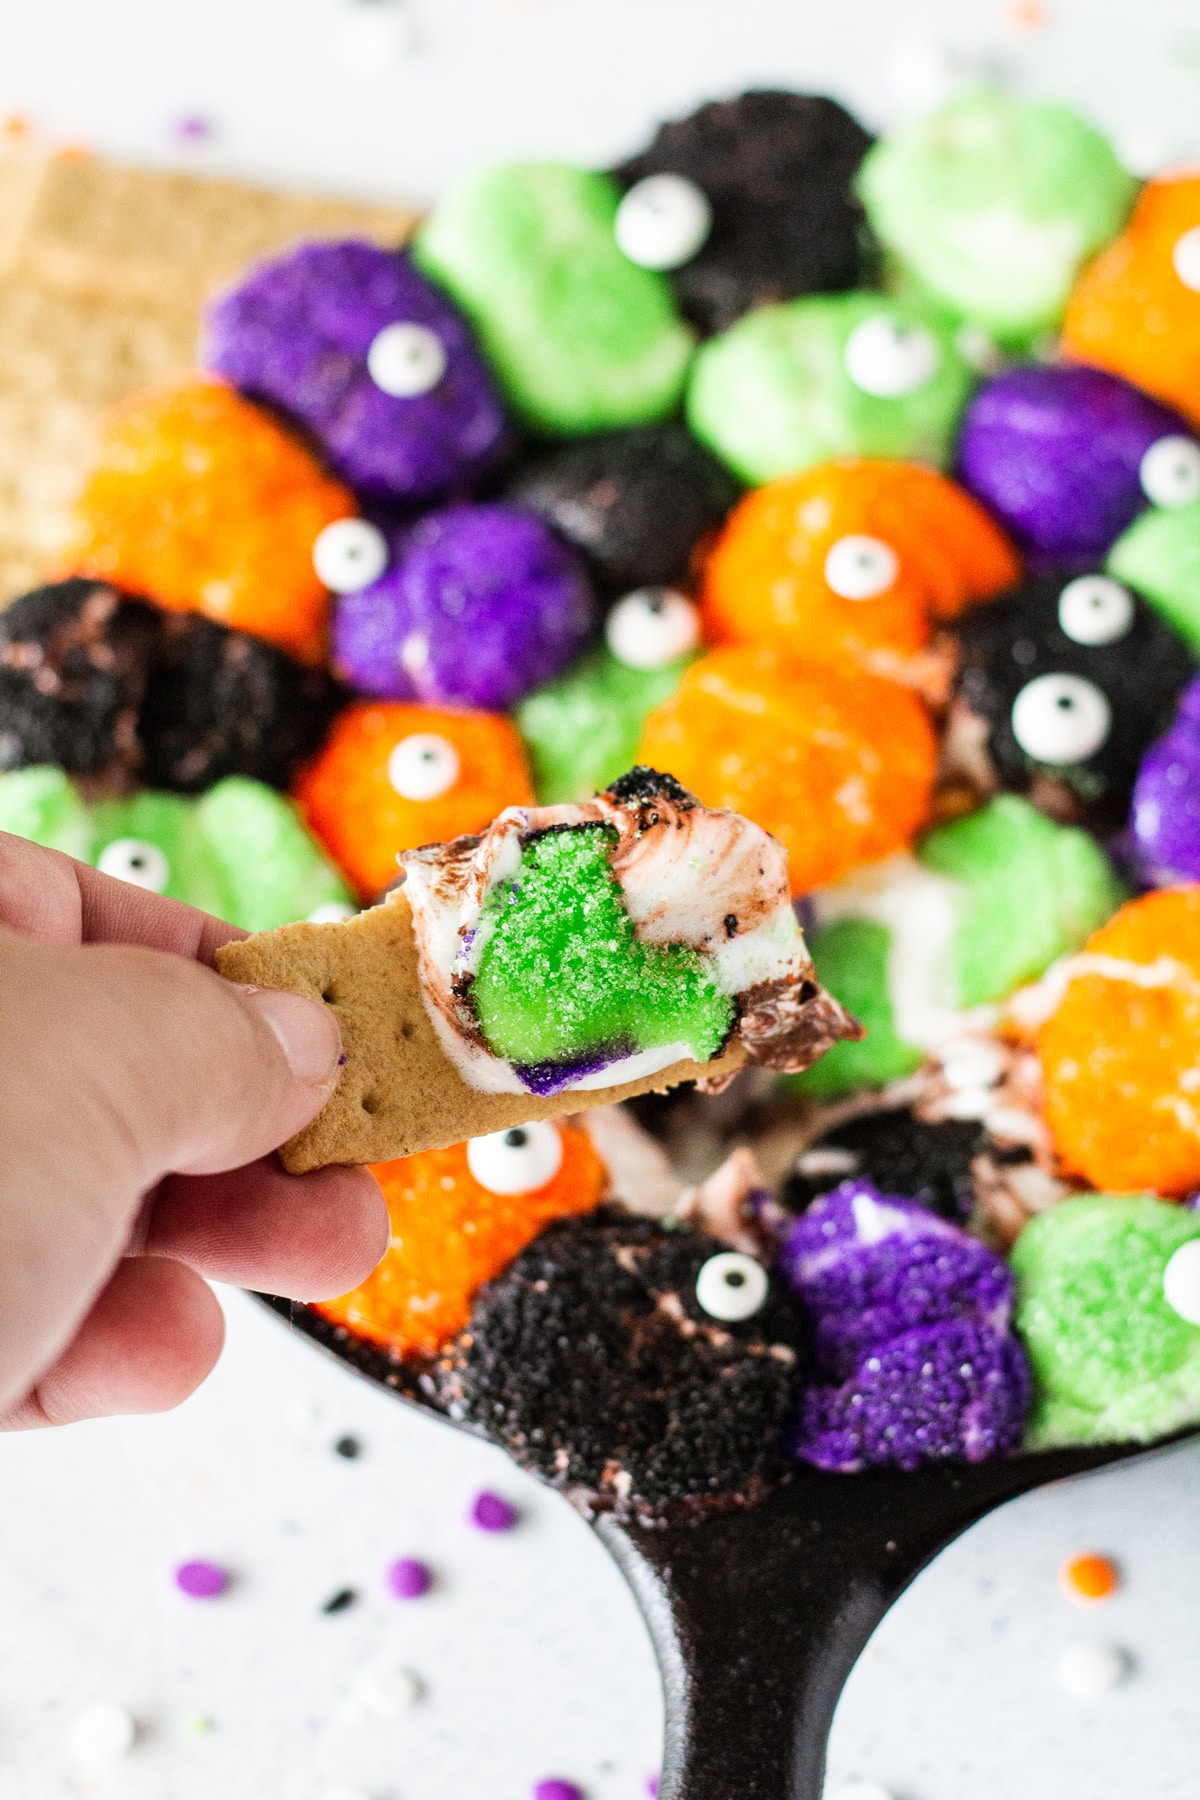 Graham crackers with Halloween smores dip